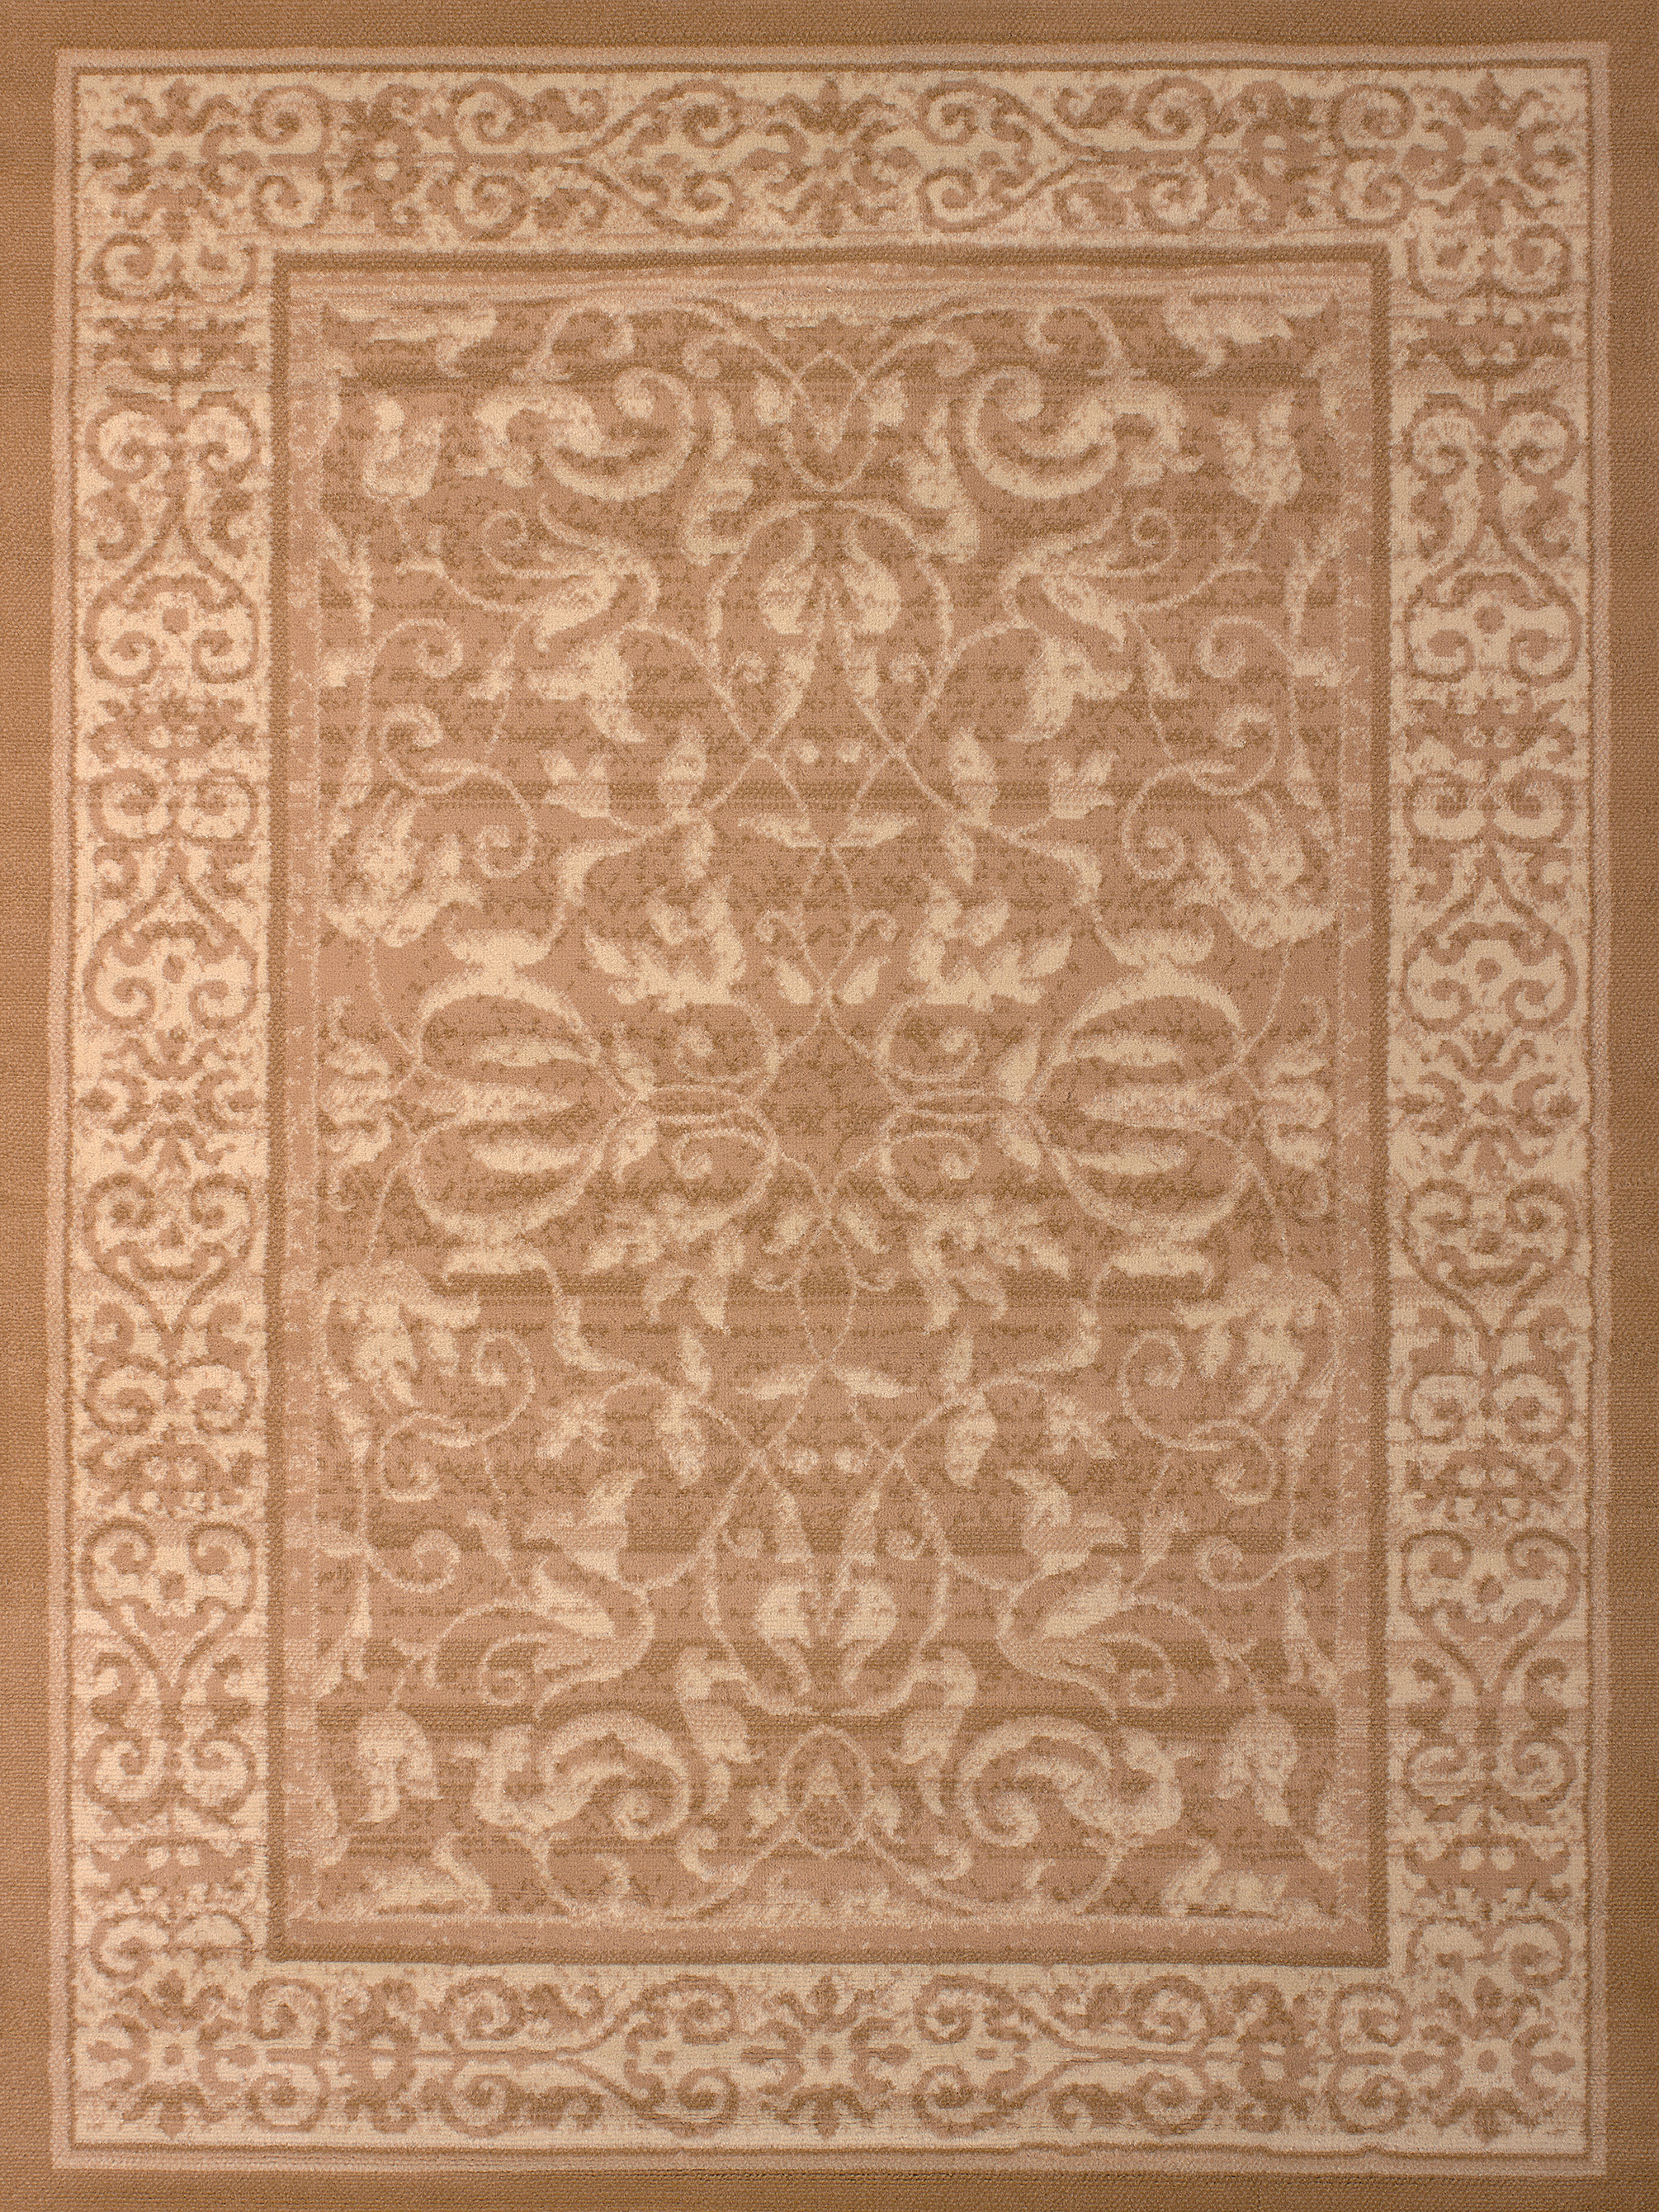 United Weavers Plaza Genevieve Accent Rug, Bordered Pattern, Beige, 1'11" X 3'3" - image 2 of 6